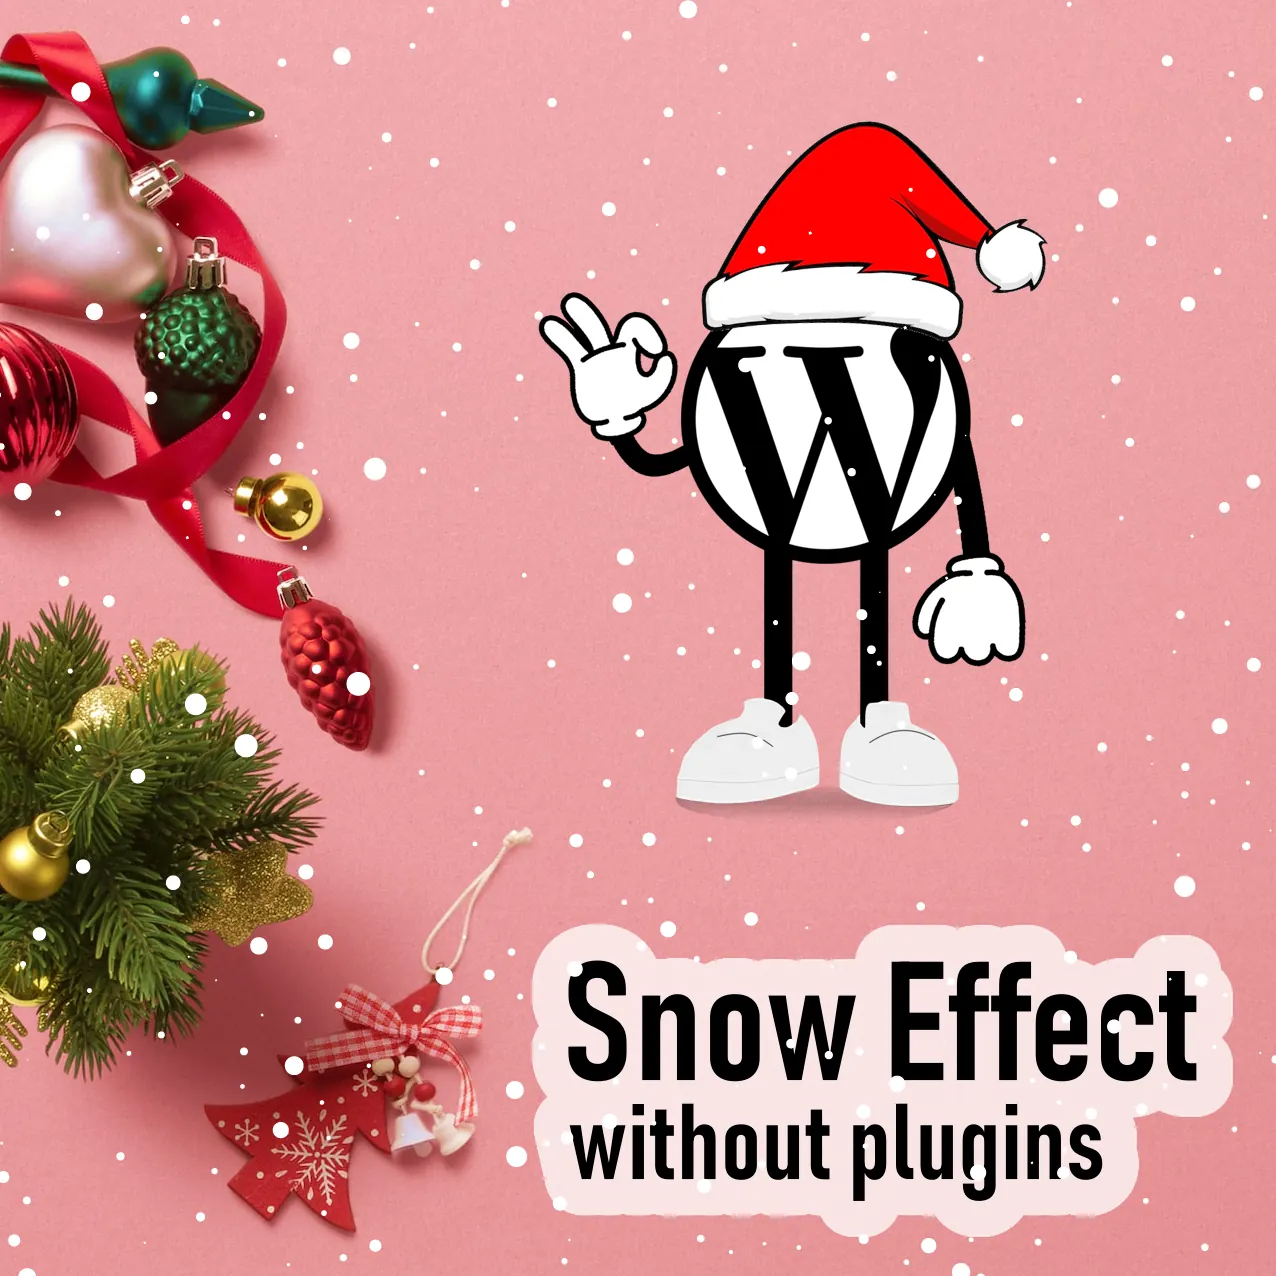 Best Snow Effect for WordPress without plugins